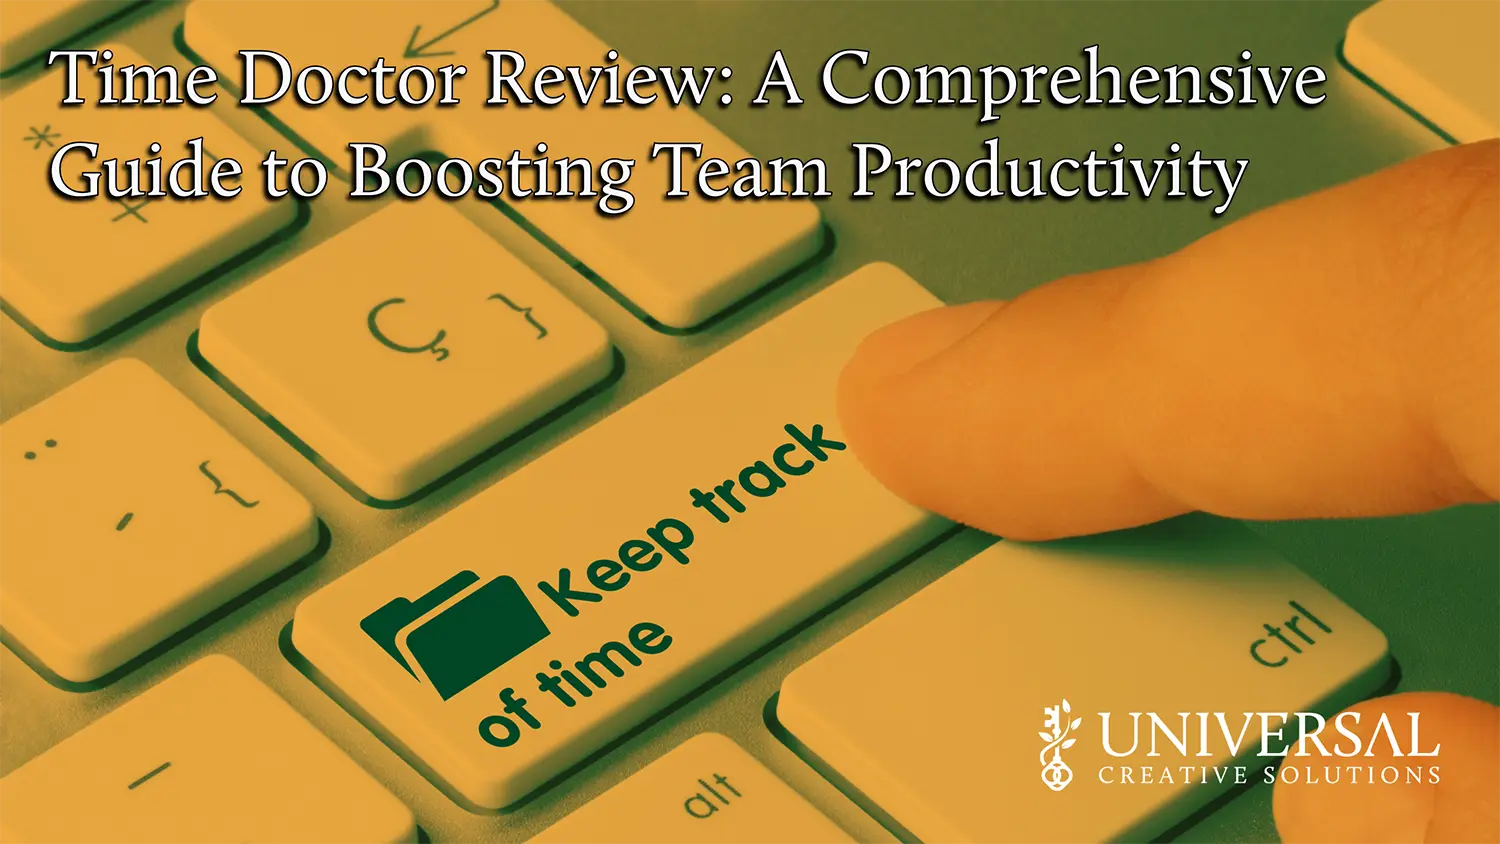 Time Doctor Review: A Comprehensive Guide to Boosting Team Productivity